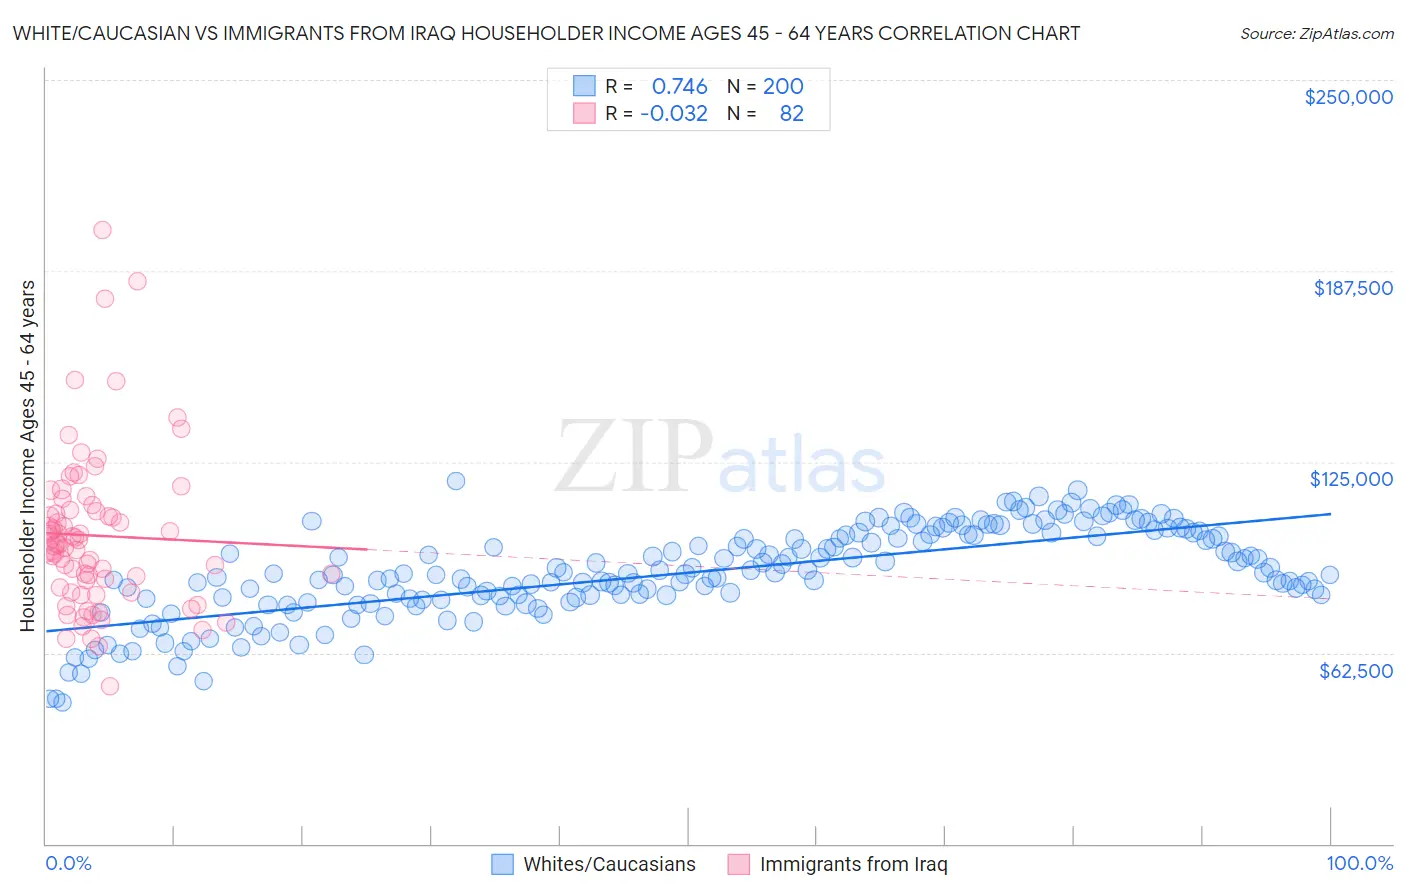 White/Caucasian vs Immigrants from Iraq Householder Income Ages 45 - 64 years